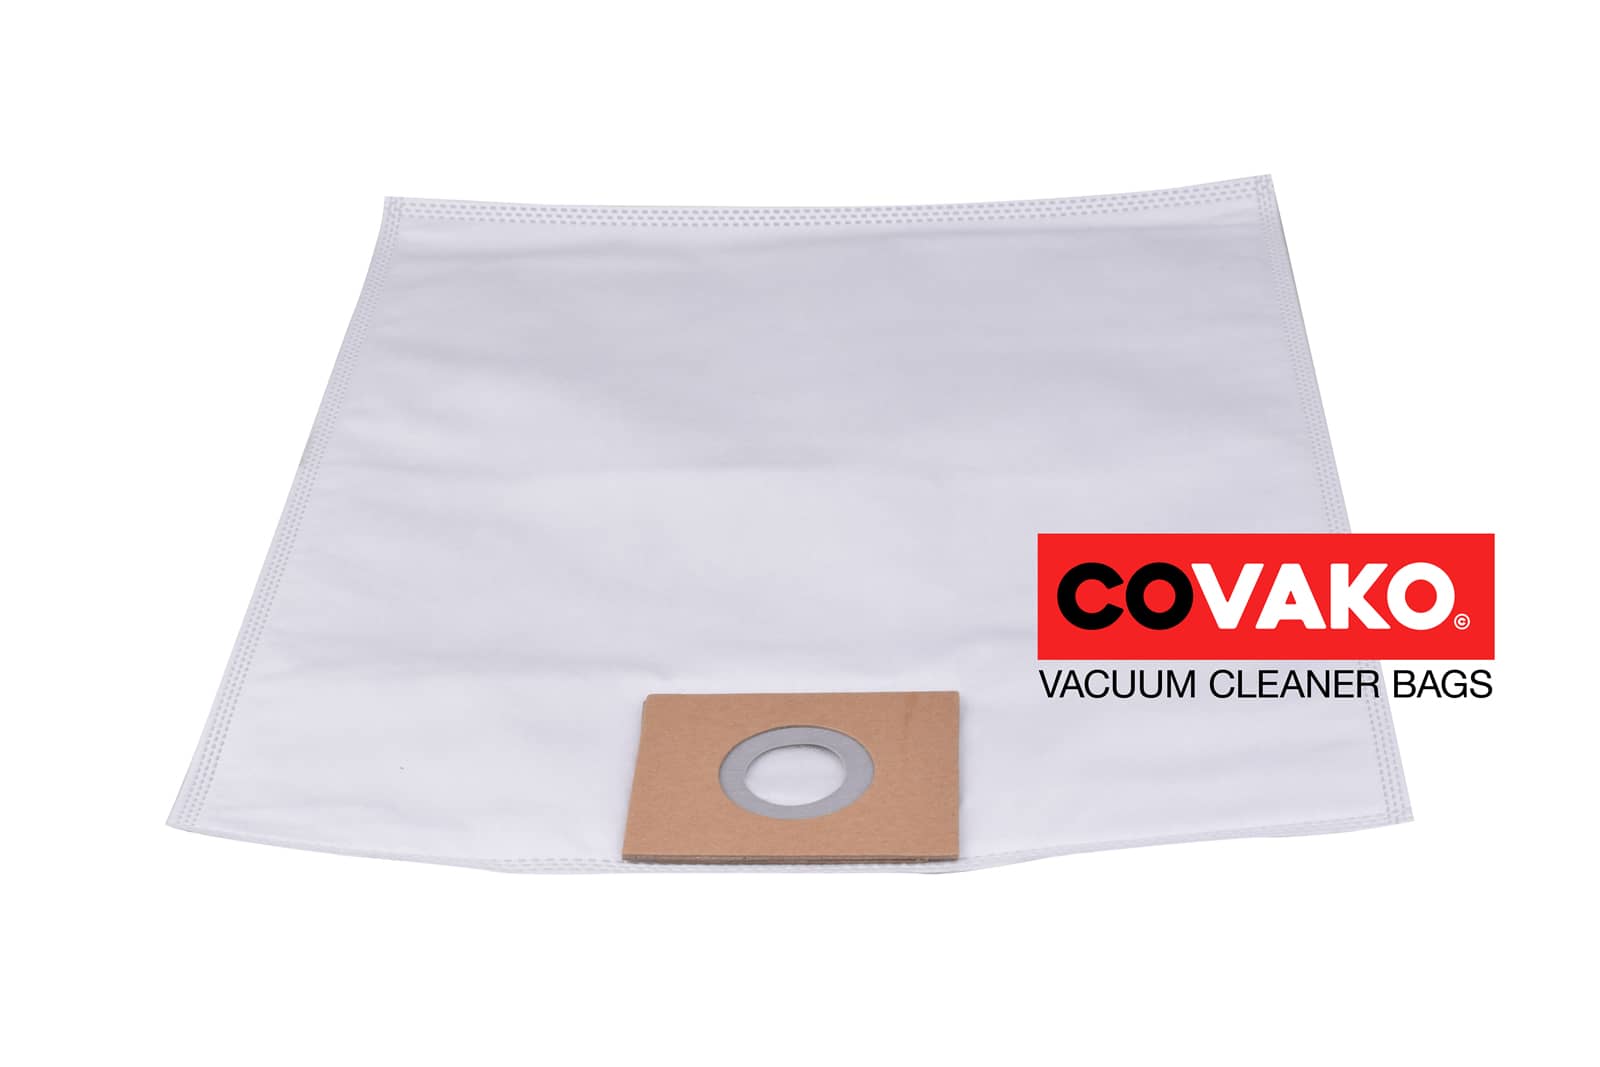 Fimap FV 10 / Synthesis - Fimap vacuum cleaner bags